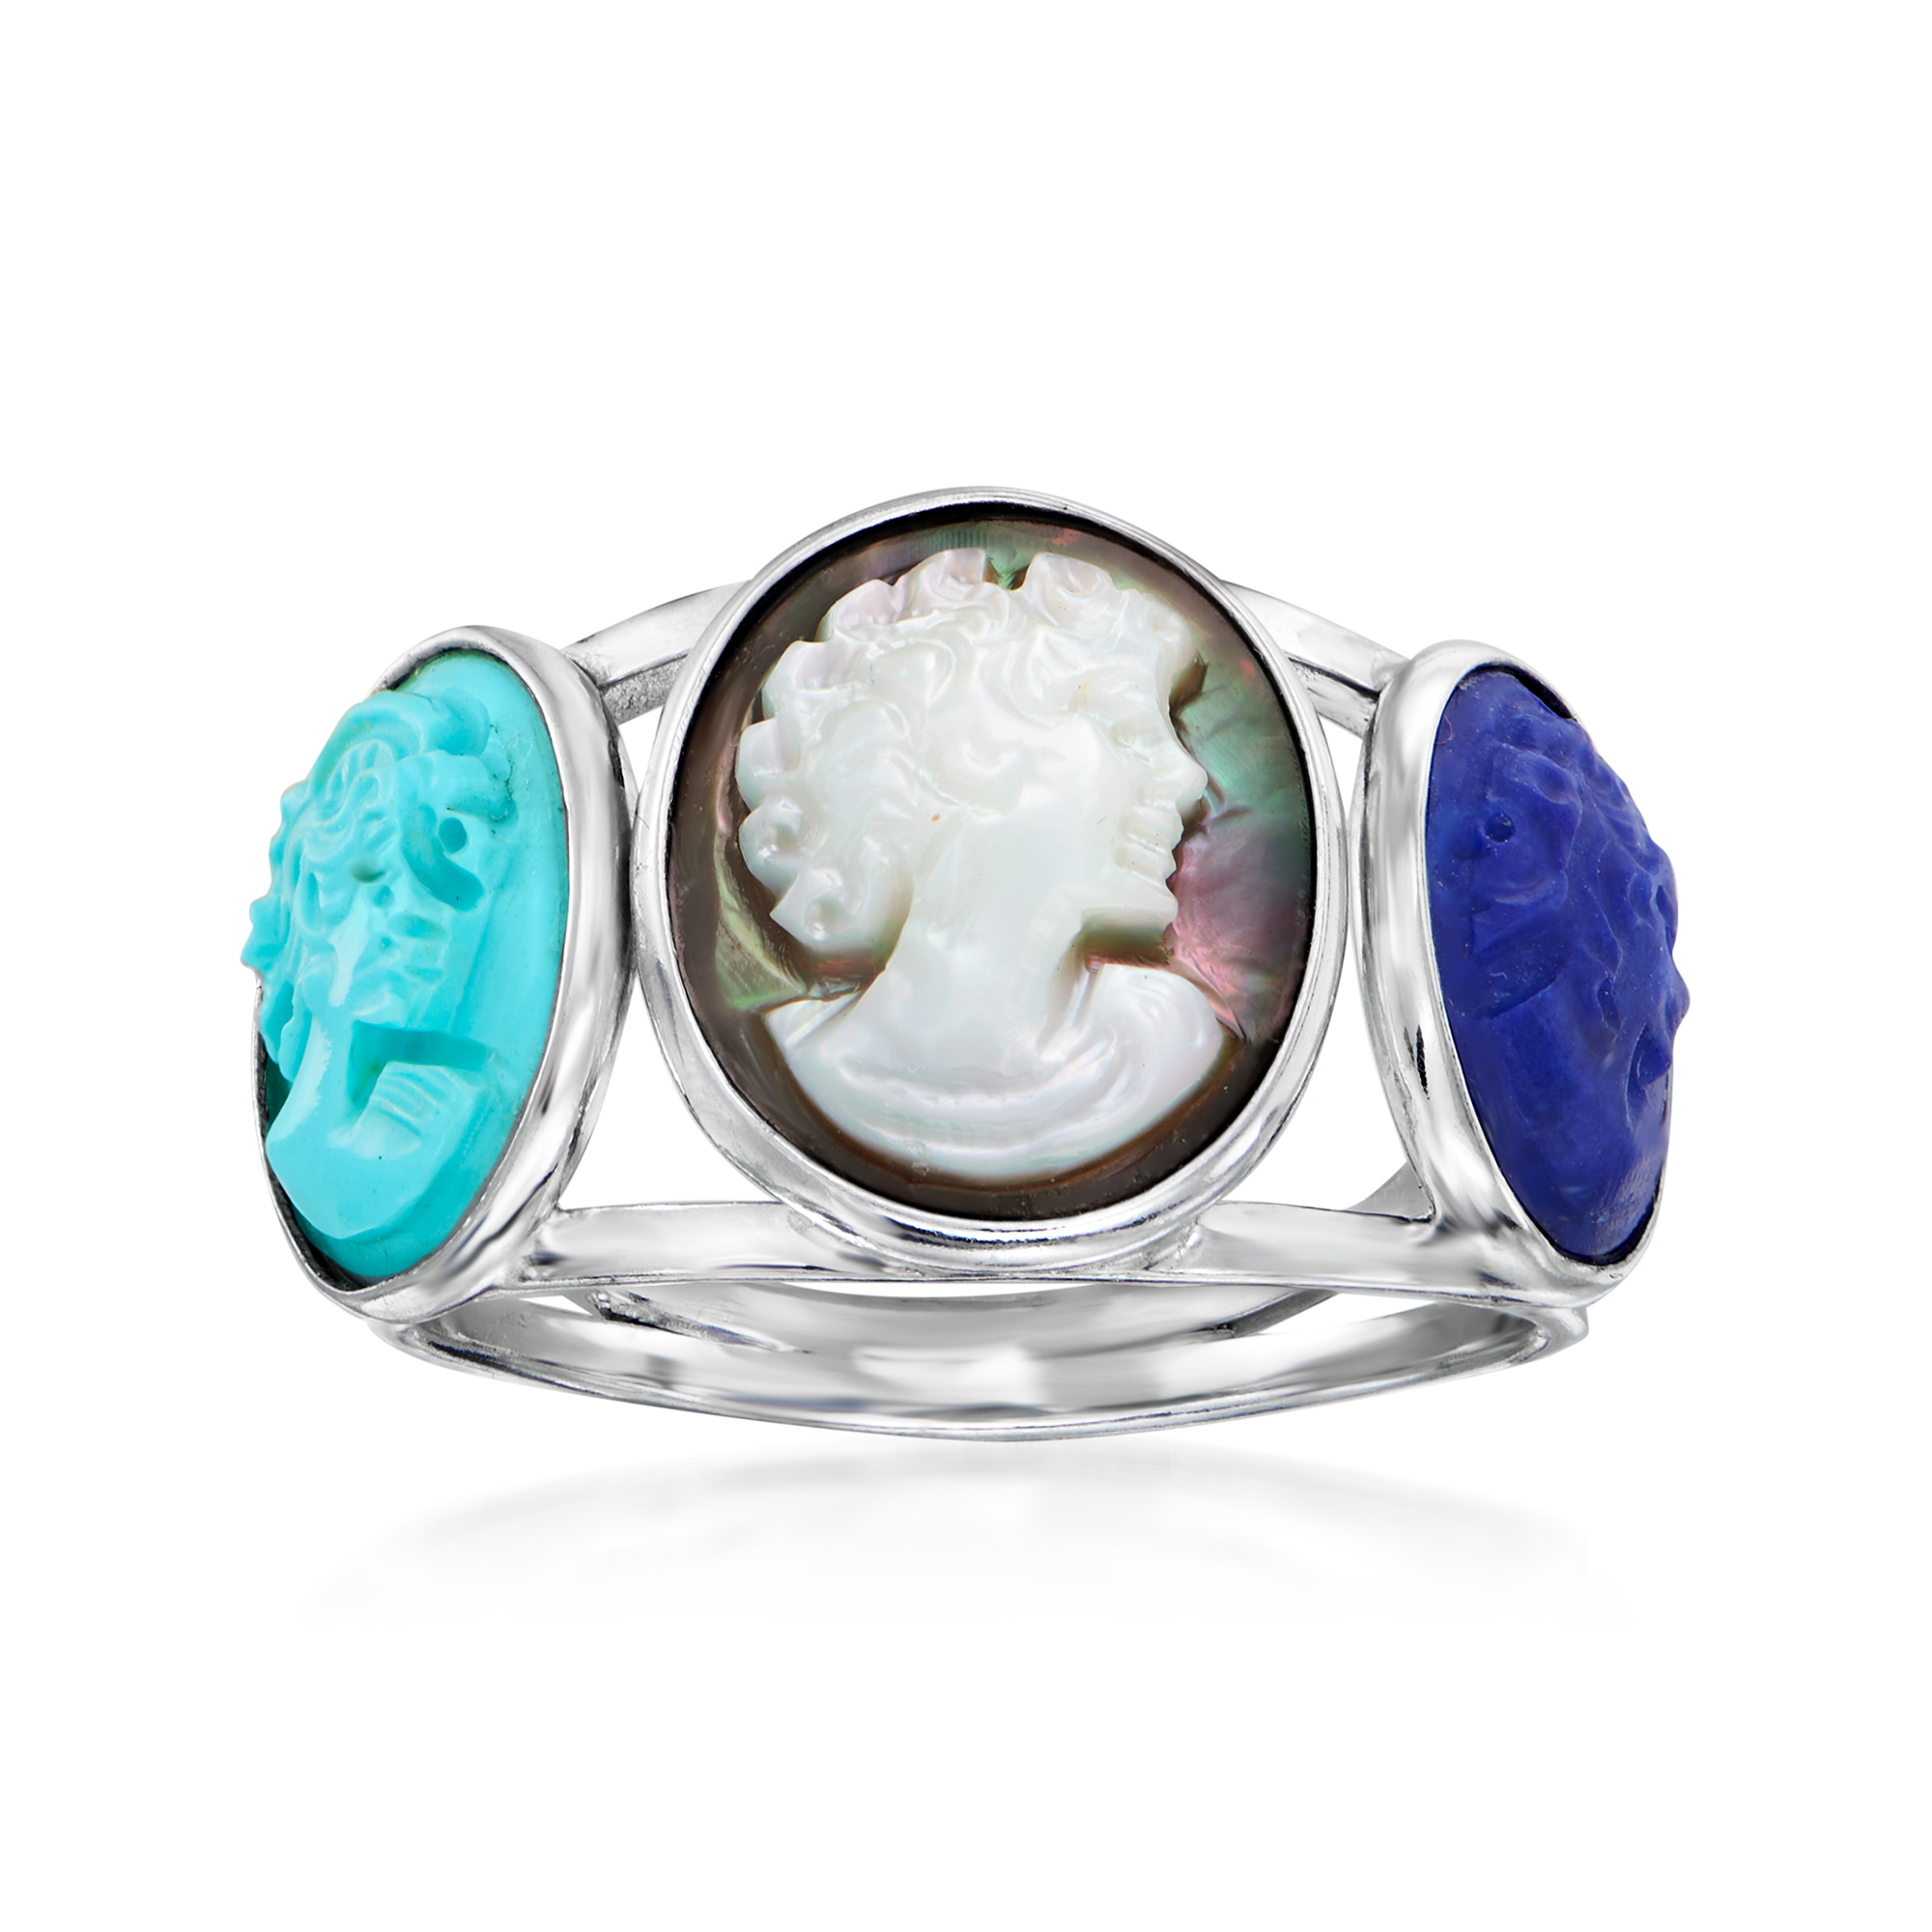 MOTHER OF PEARL CAMEO Ring - Size 6